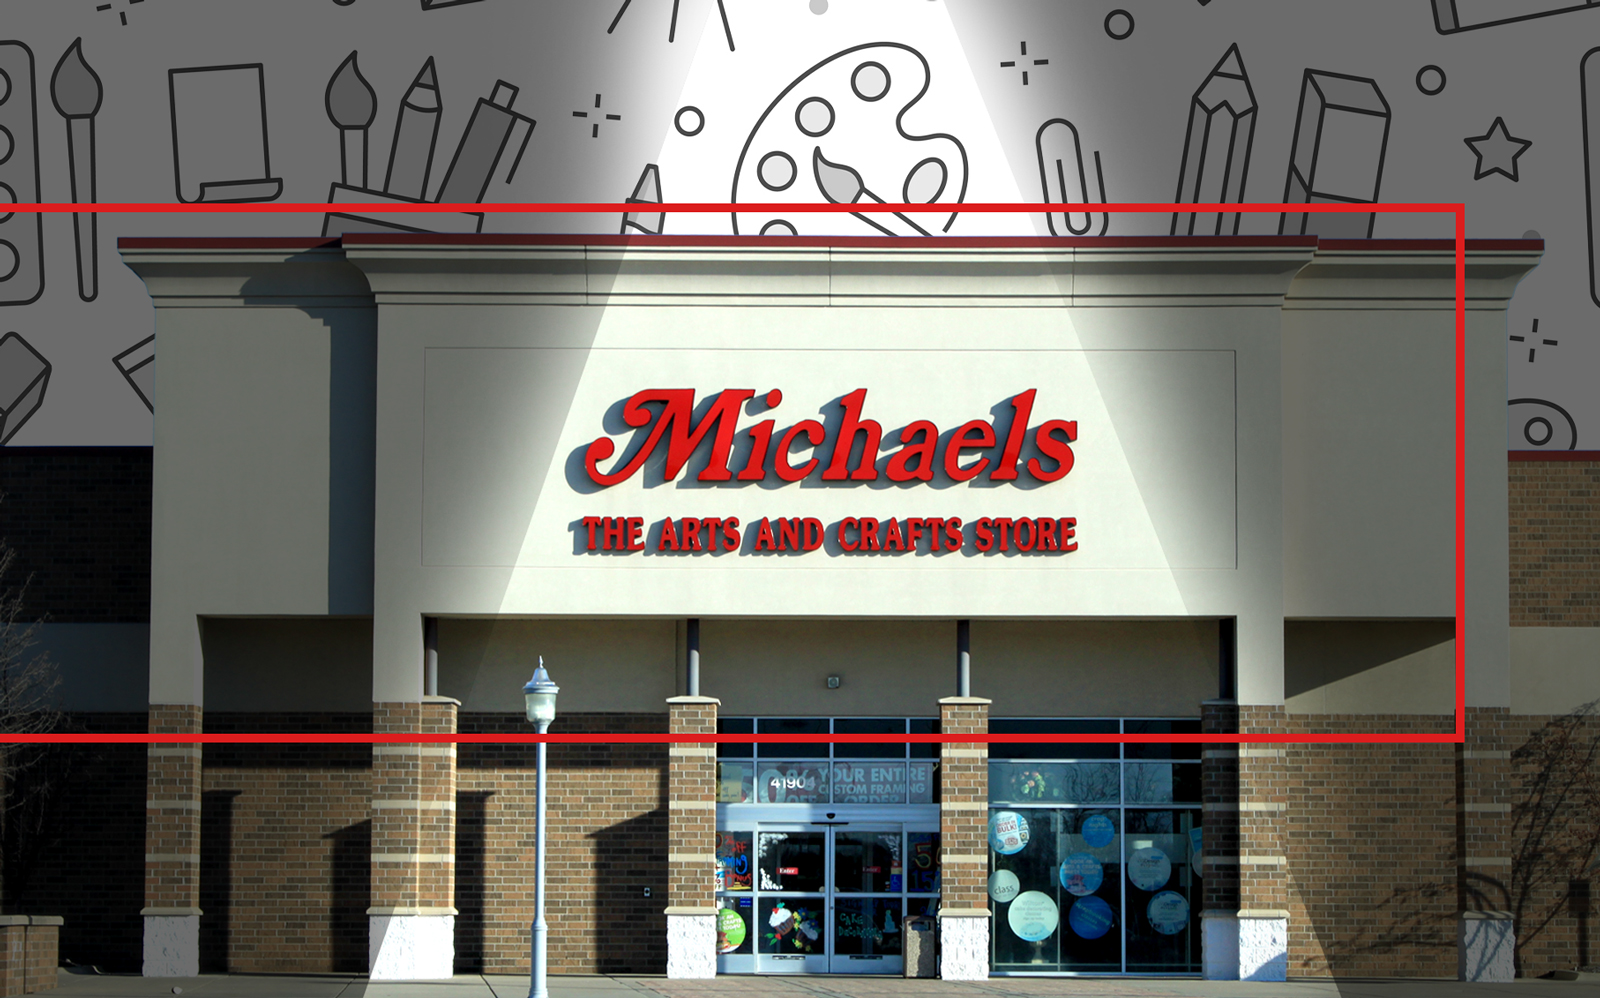 Michaels arts and crafts chain to be sold to private firm for $5